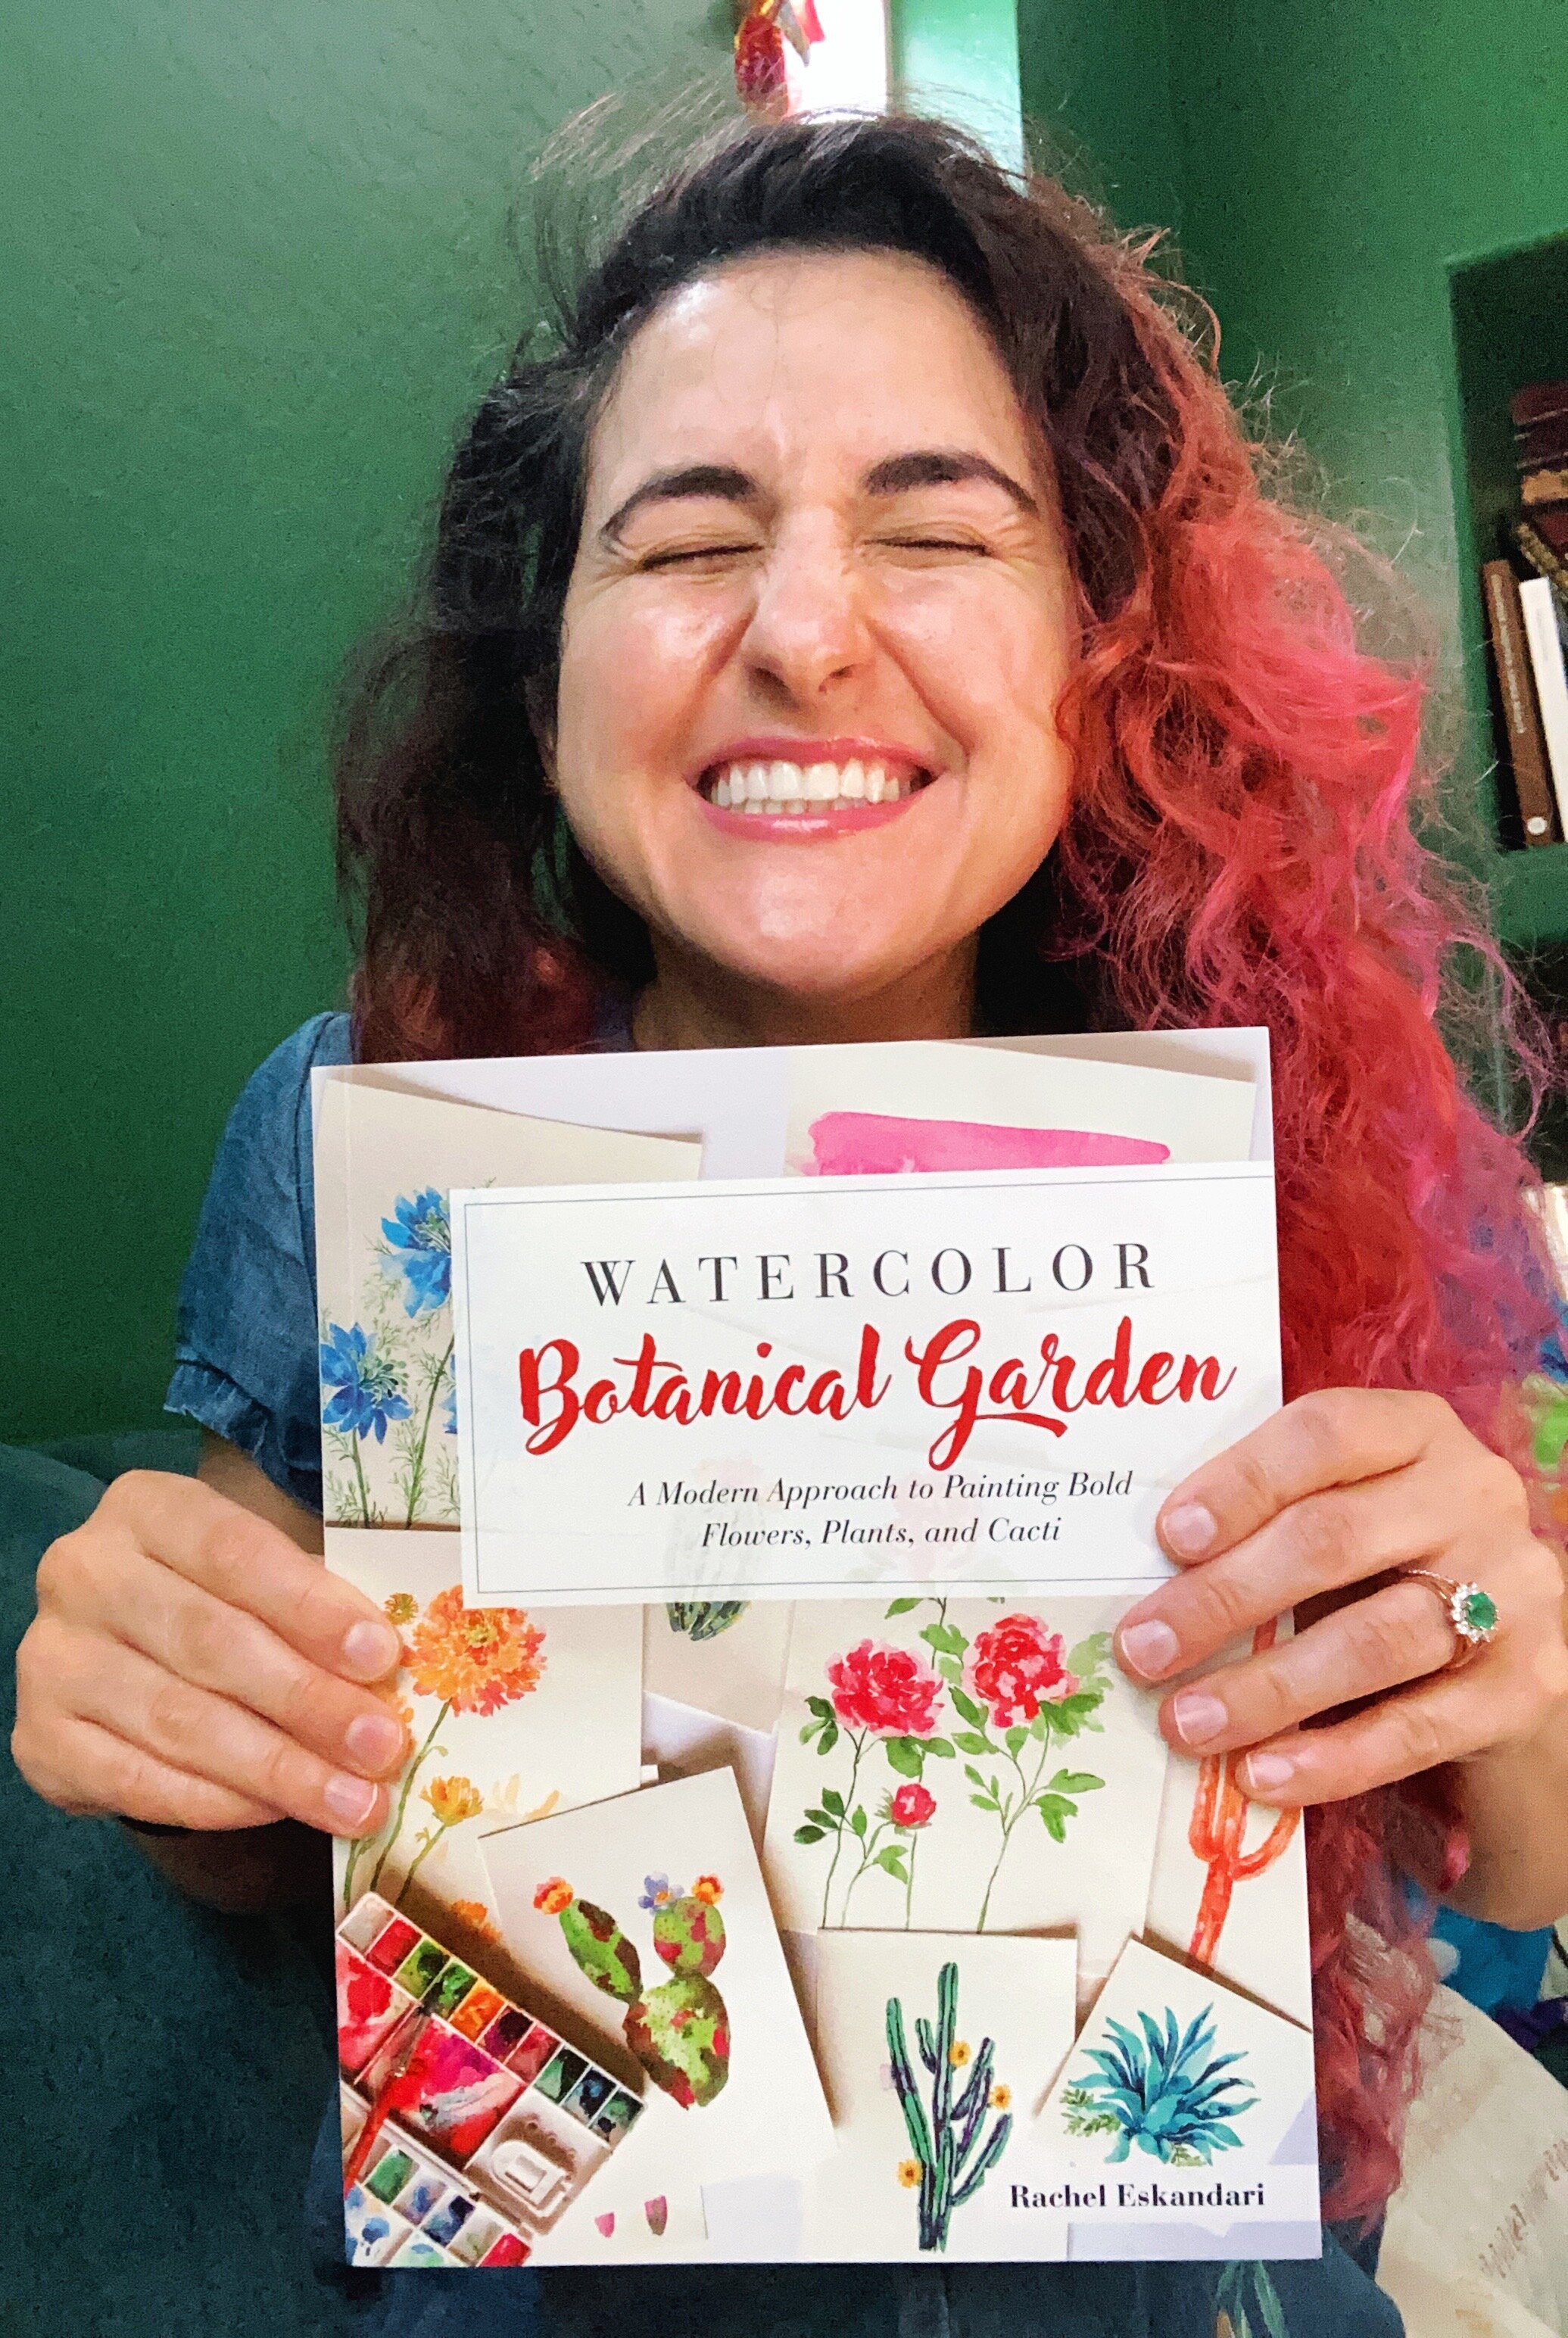 Welcome to Watercolor: A Beginners Guide to Contemporary Botanical